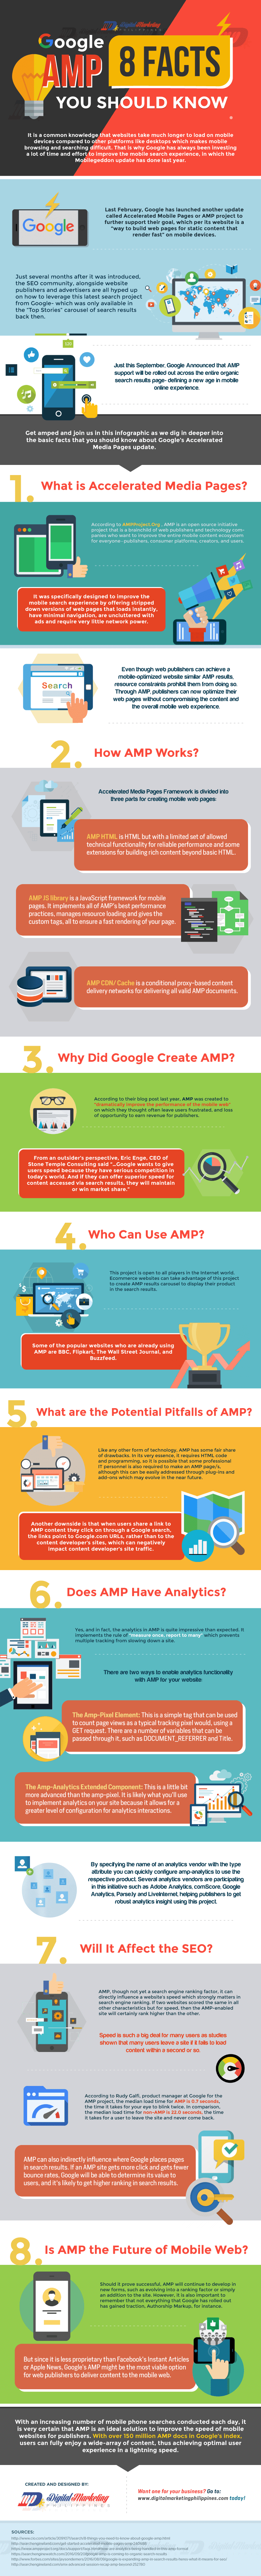 Google AMP – 8 Facts Everyone Should Know